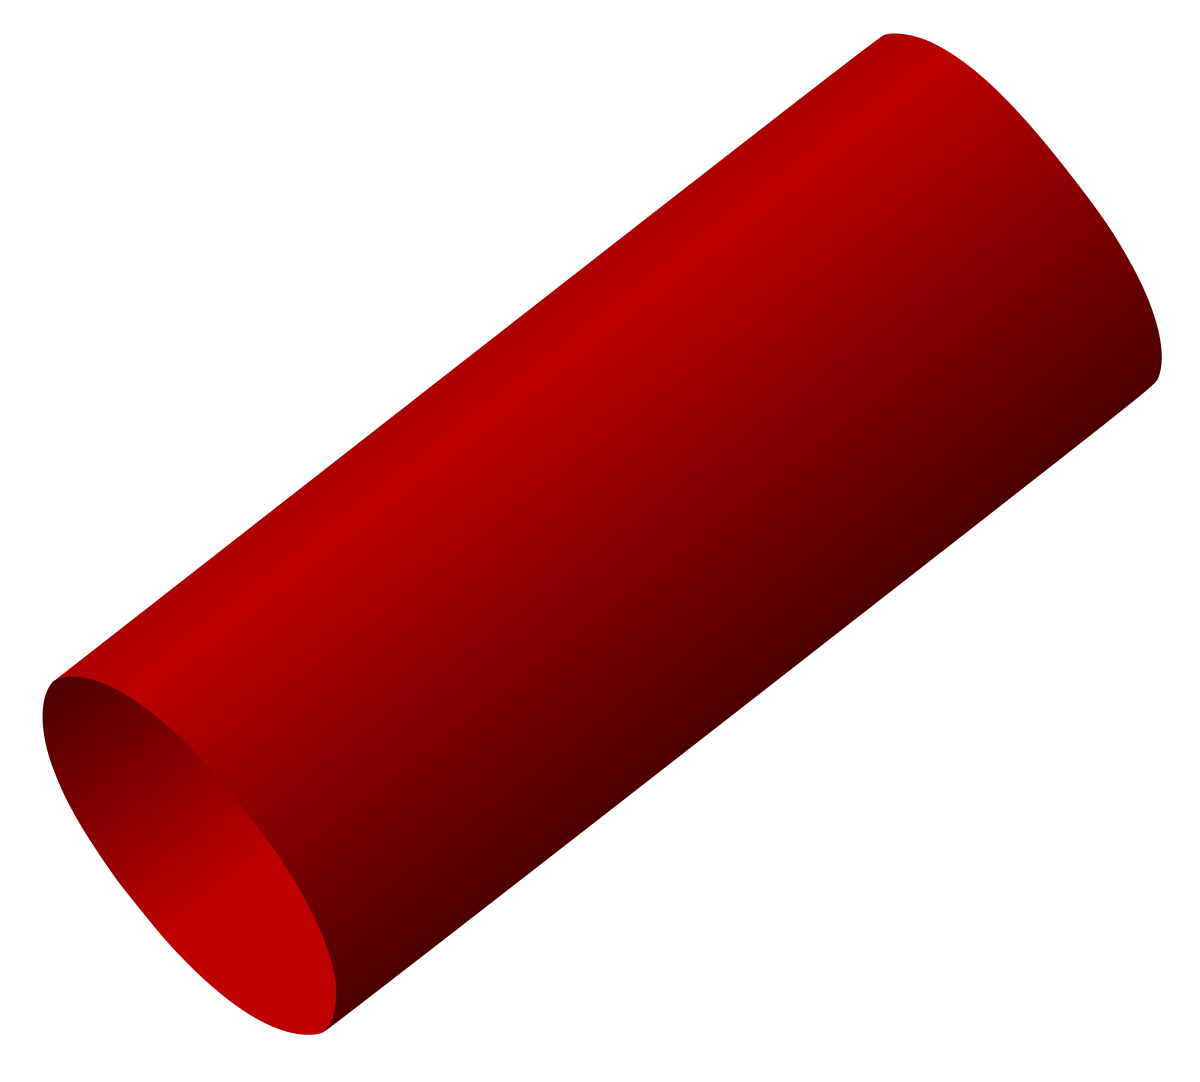 cylinder clipart